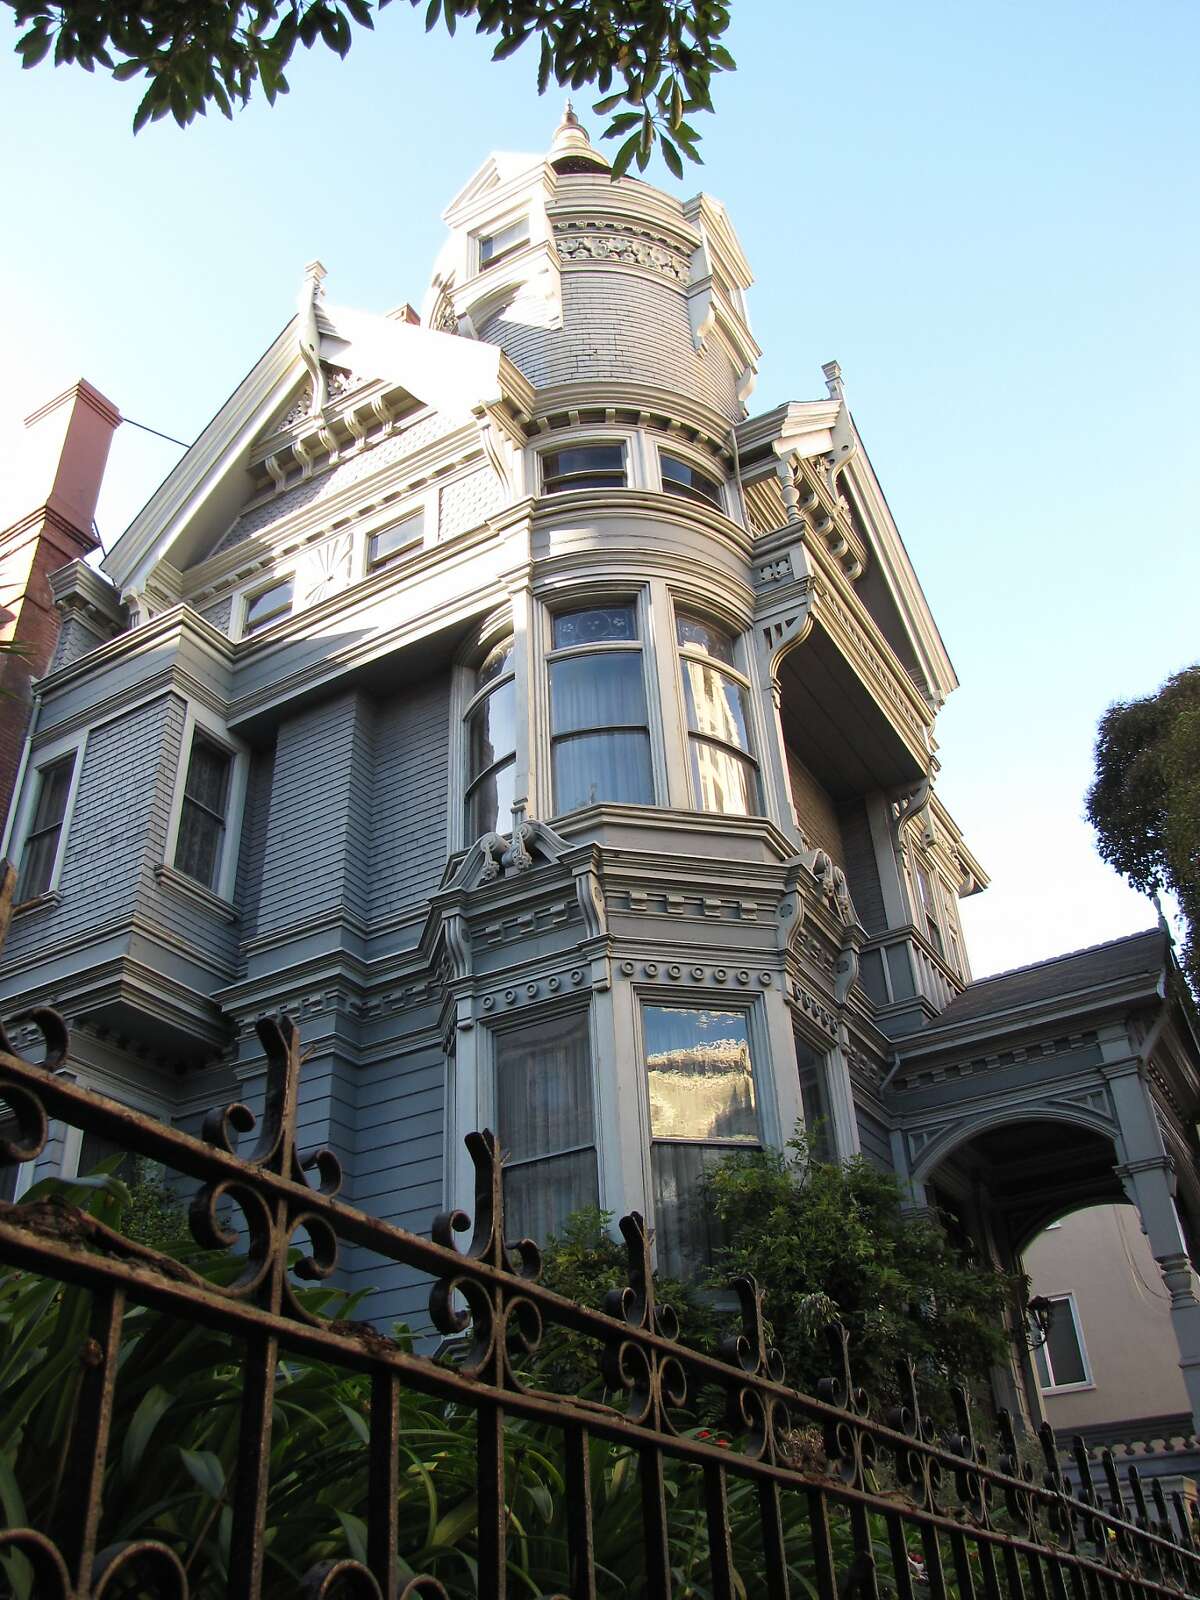 Site: Victorians, Pac Heights Location: Haas-Lilienthal House